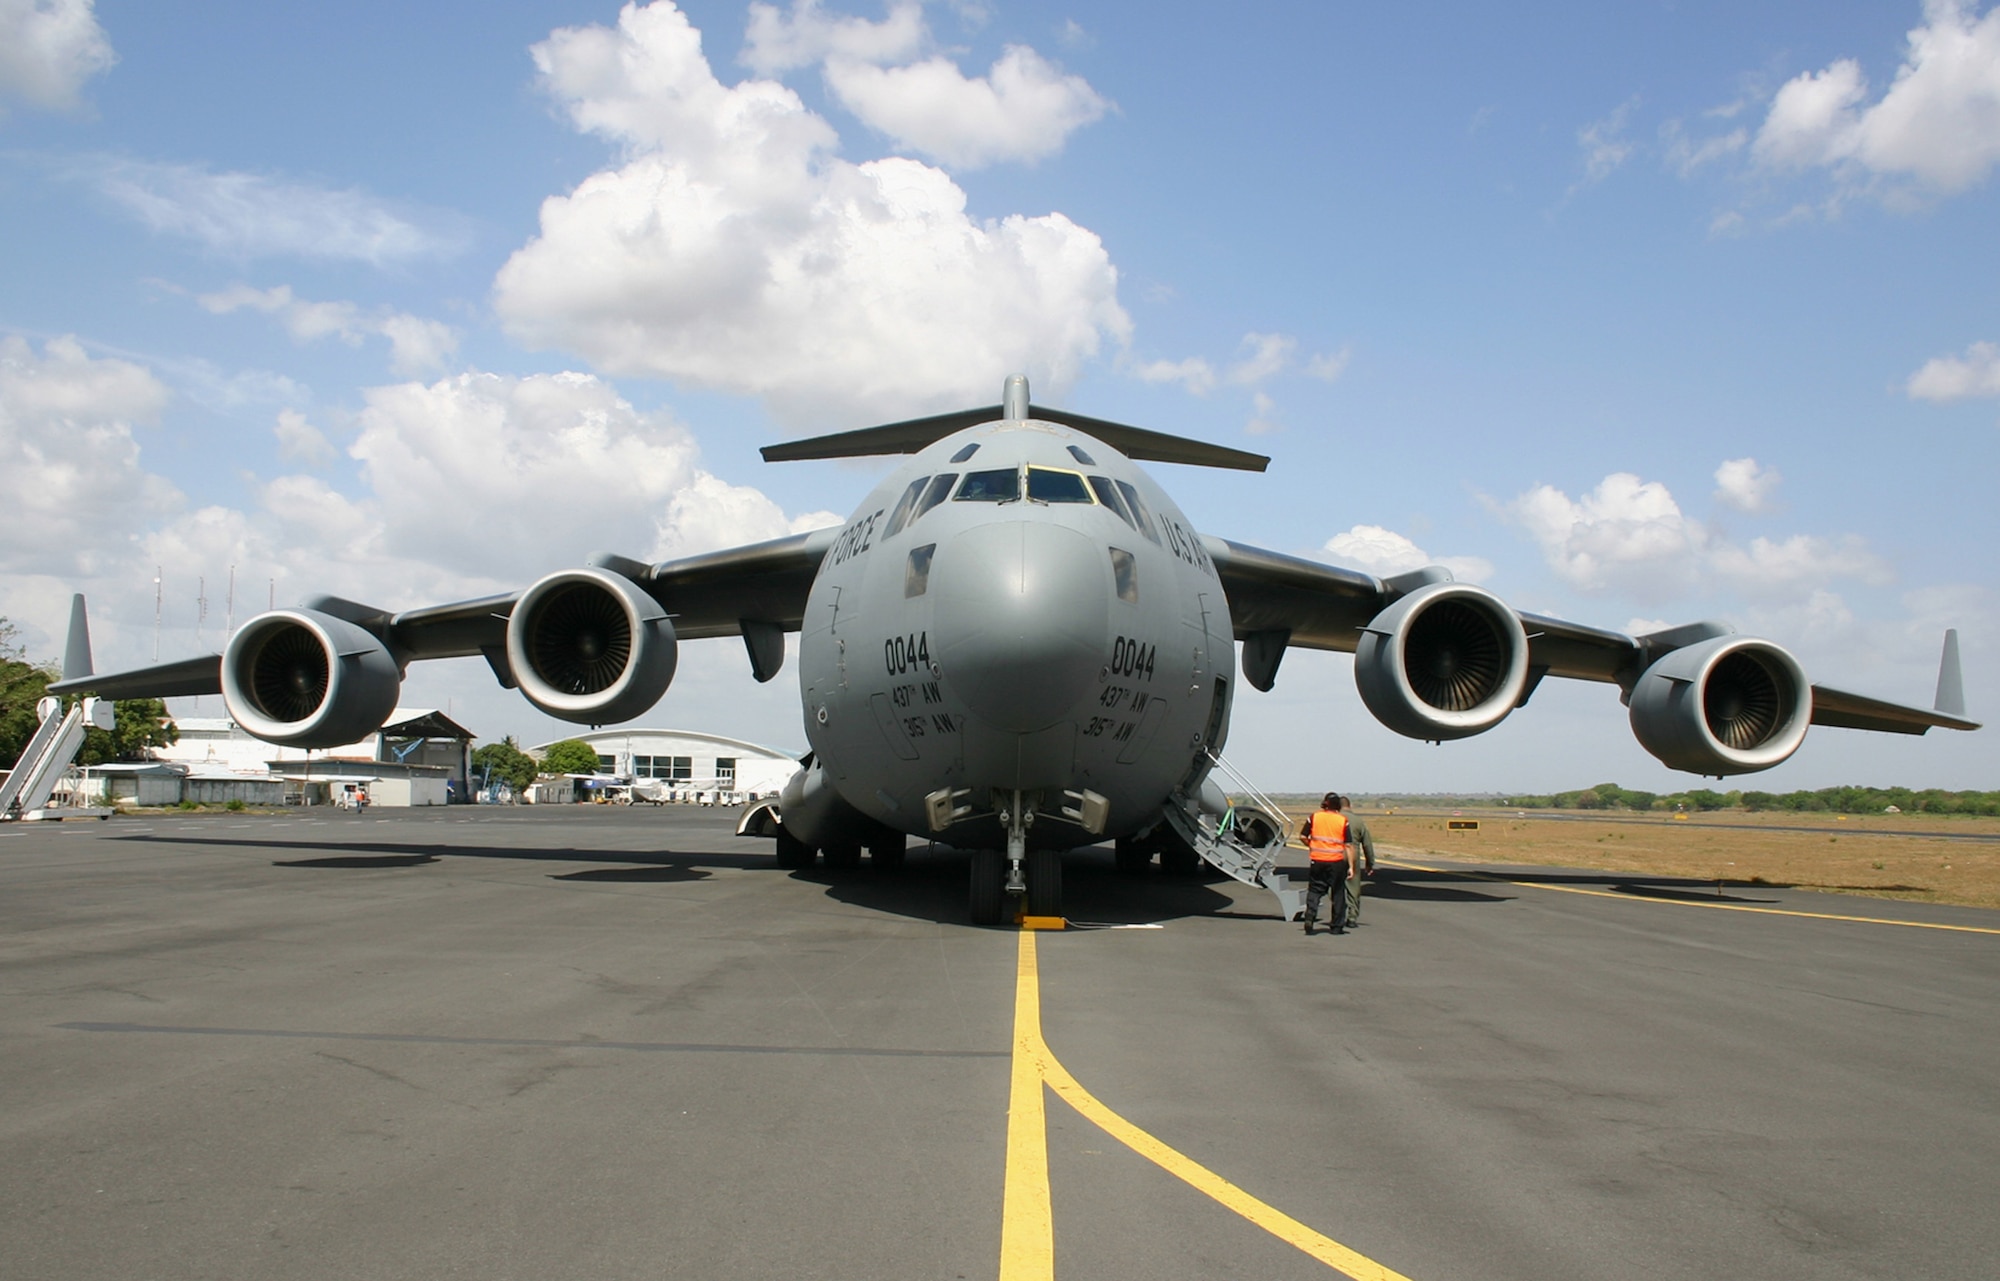 A C-17 Globemaster III from the 437th Airlift Wing at Charleston Air Force Base, S.C., sits on the ramp of Managua International Airport in Nicaragua May 9, after its crew offloaded cargo during a mission to deliver personal protective kits to help reduce the spread of the H1N1 influenza virus. The kits are part of a U.S. Agency for International Development shipment to Haiti, Guatemala, Honduras, El Salvador, Nicaragua and Belize to help these nations prepare for a potential outbreak of the H1N1 influenza virus. (U.S. Air Force photo/Raymond Sarracino) 